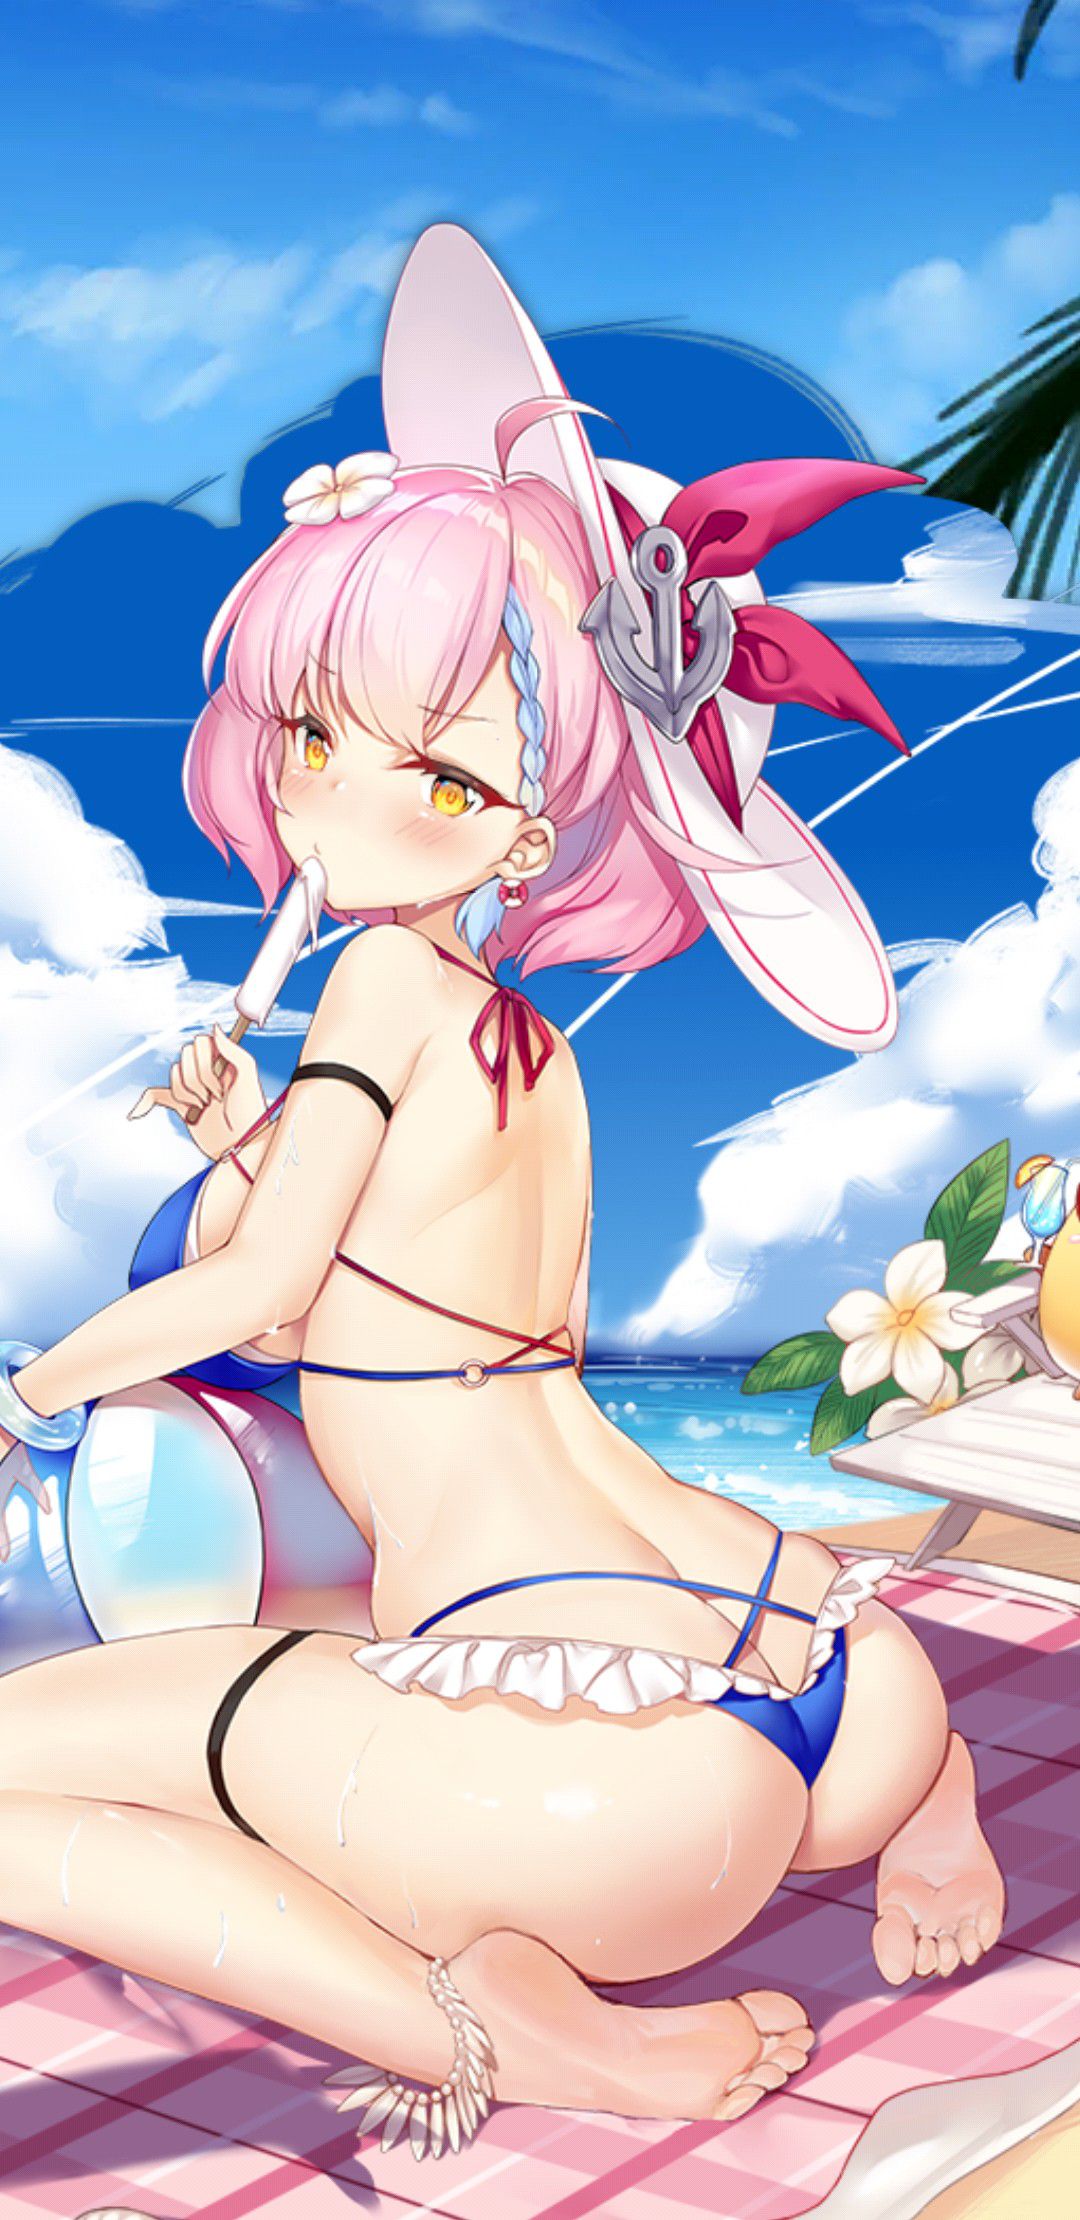 【There is an image】 Smartphone that urges charging with erotic swimsuits is malicious 39